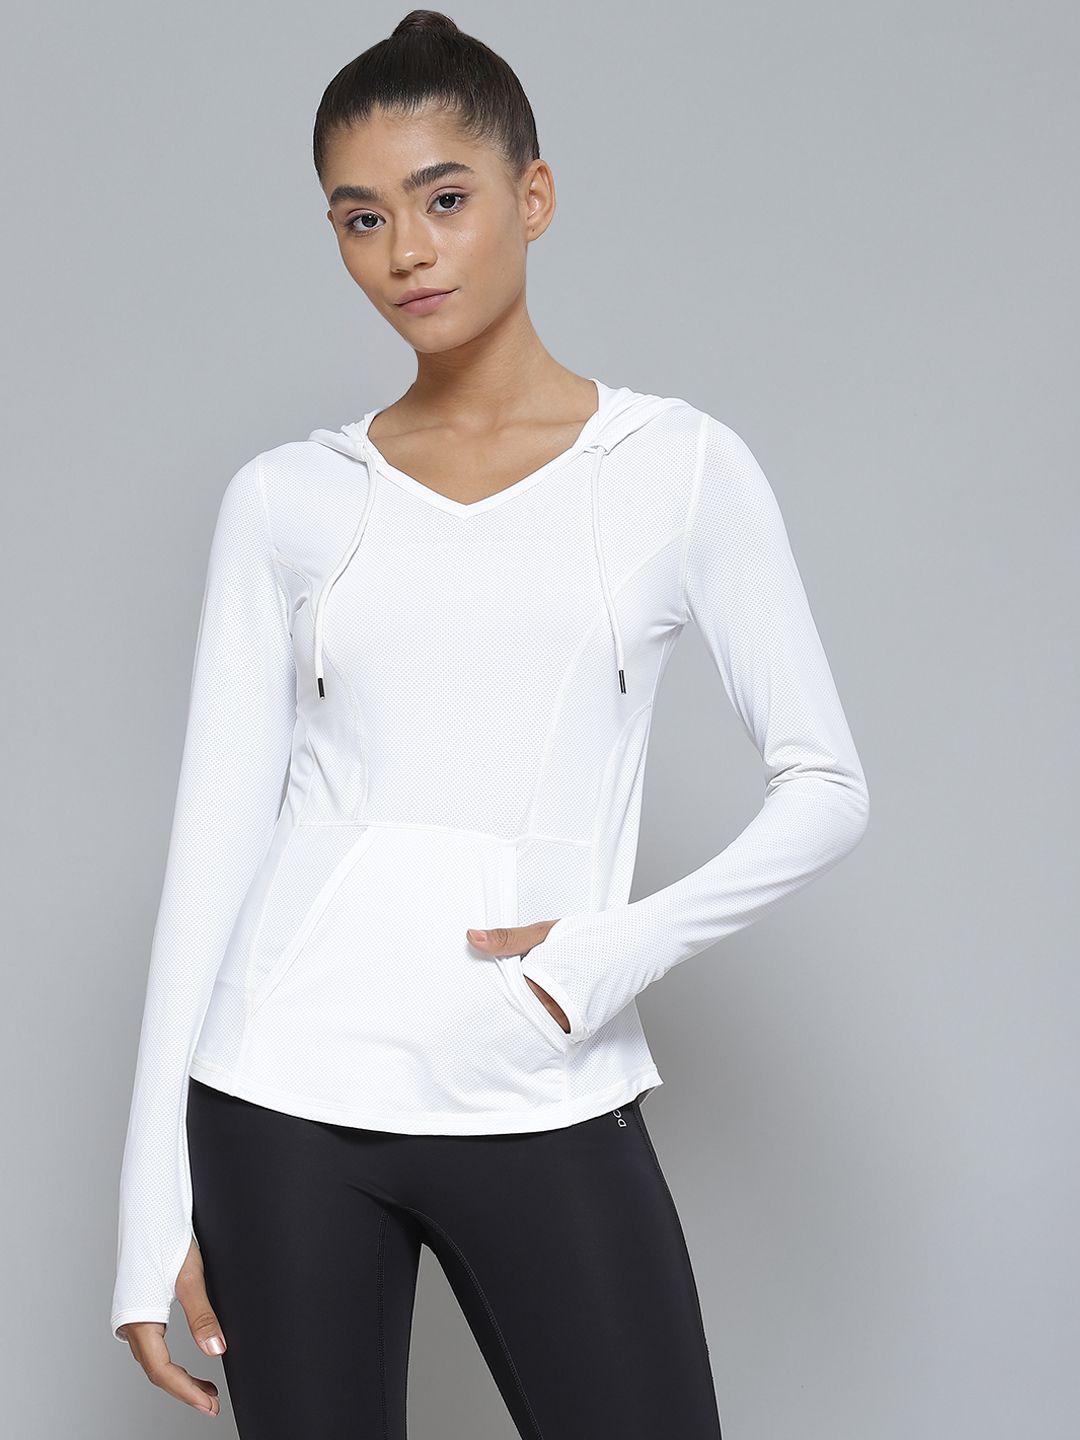 Fitkin Women White Hooded Sports T-shirt Price in India